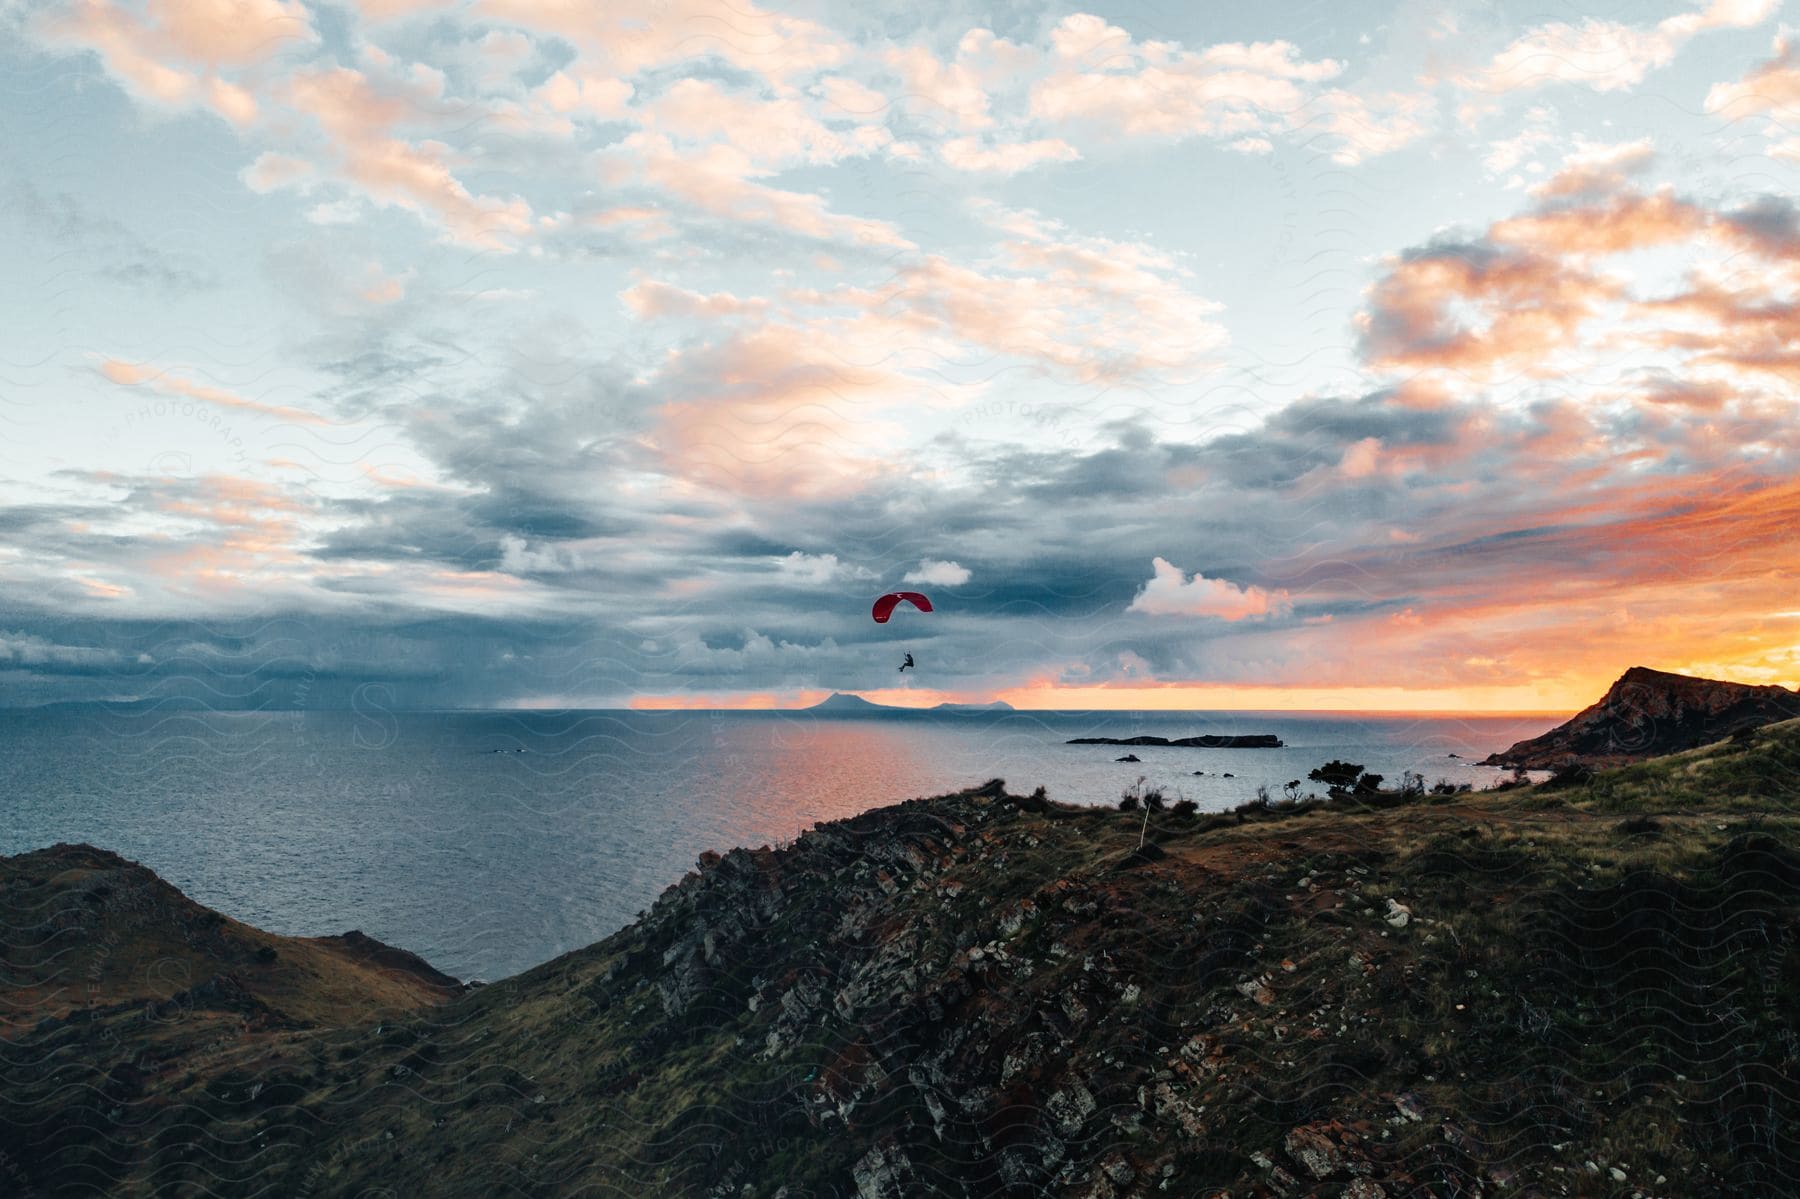 A colorful cloud formation fills the sky over rolling hills as a person glides through the air